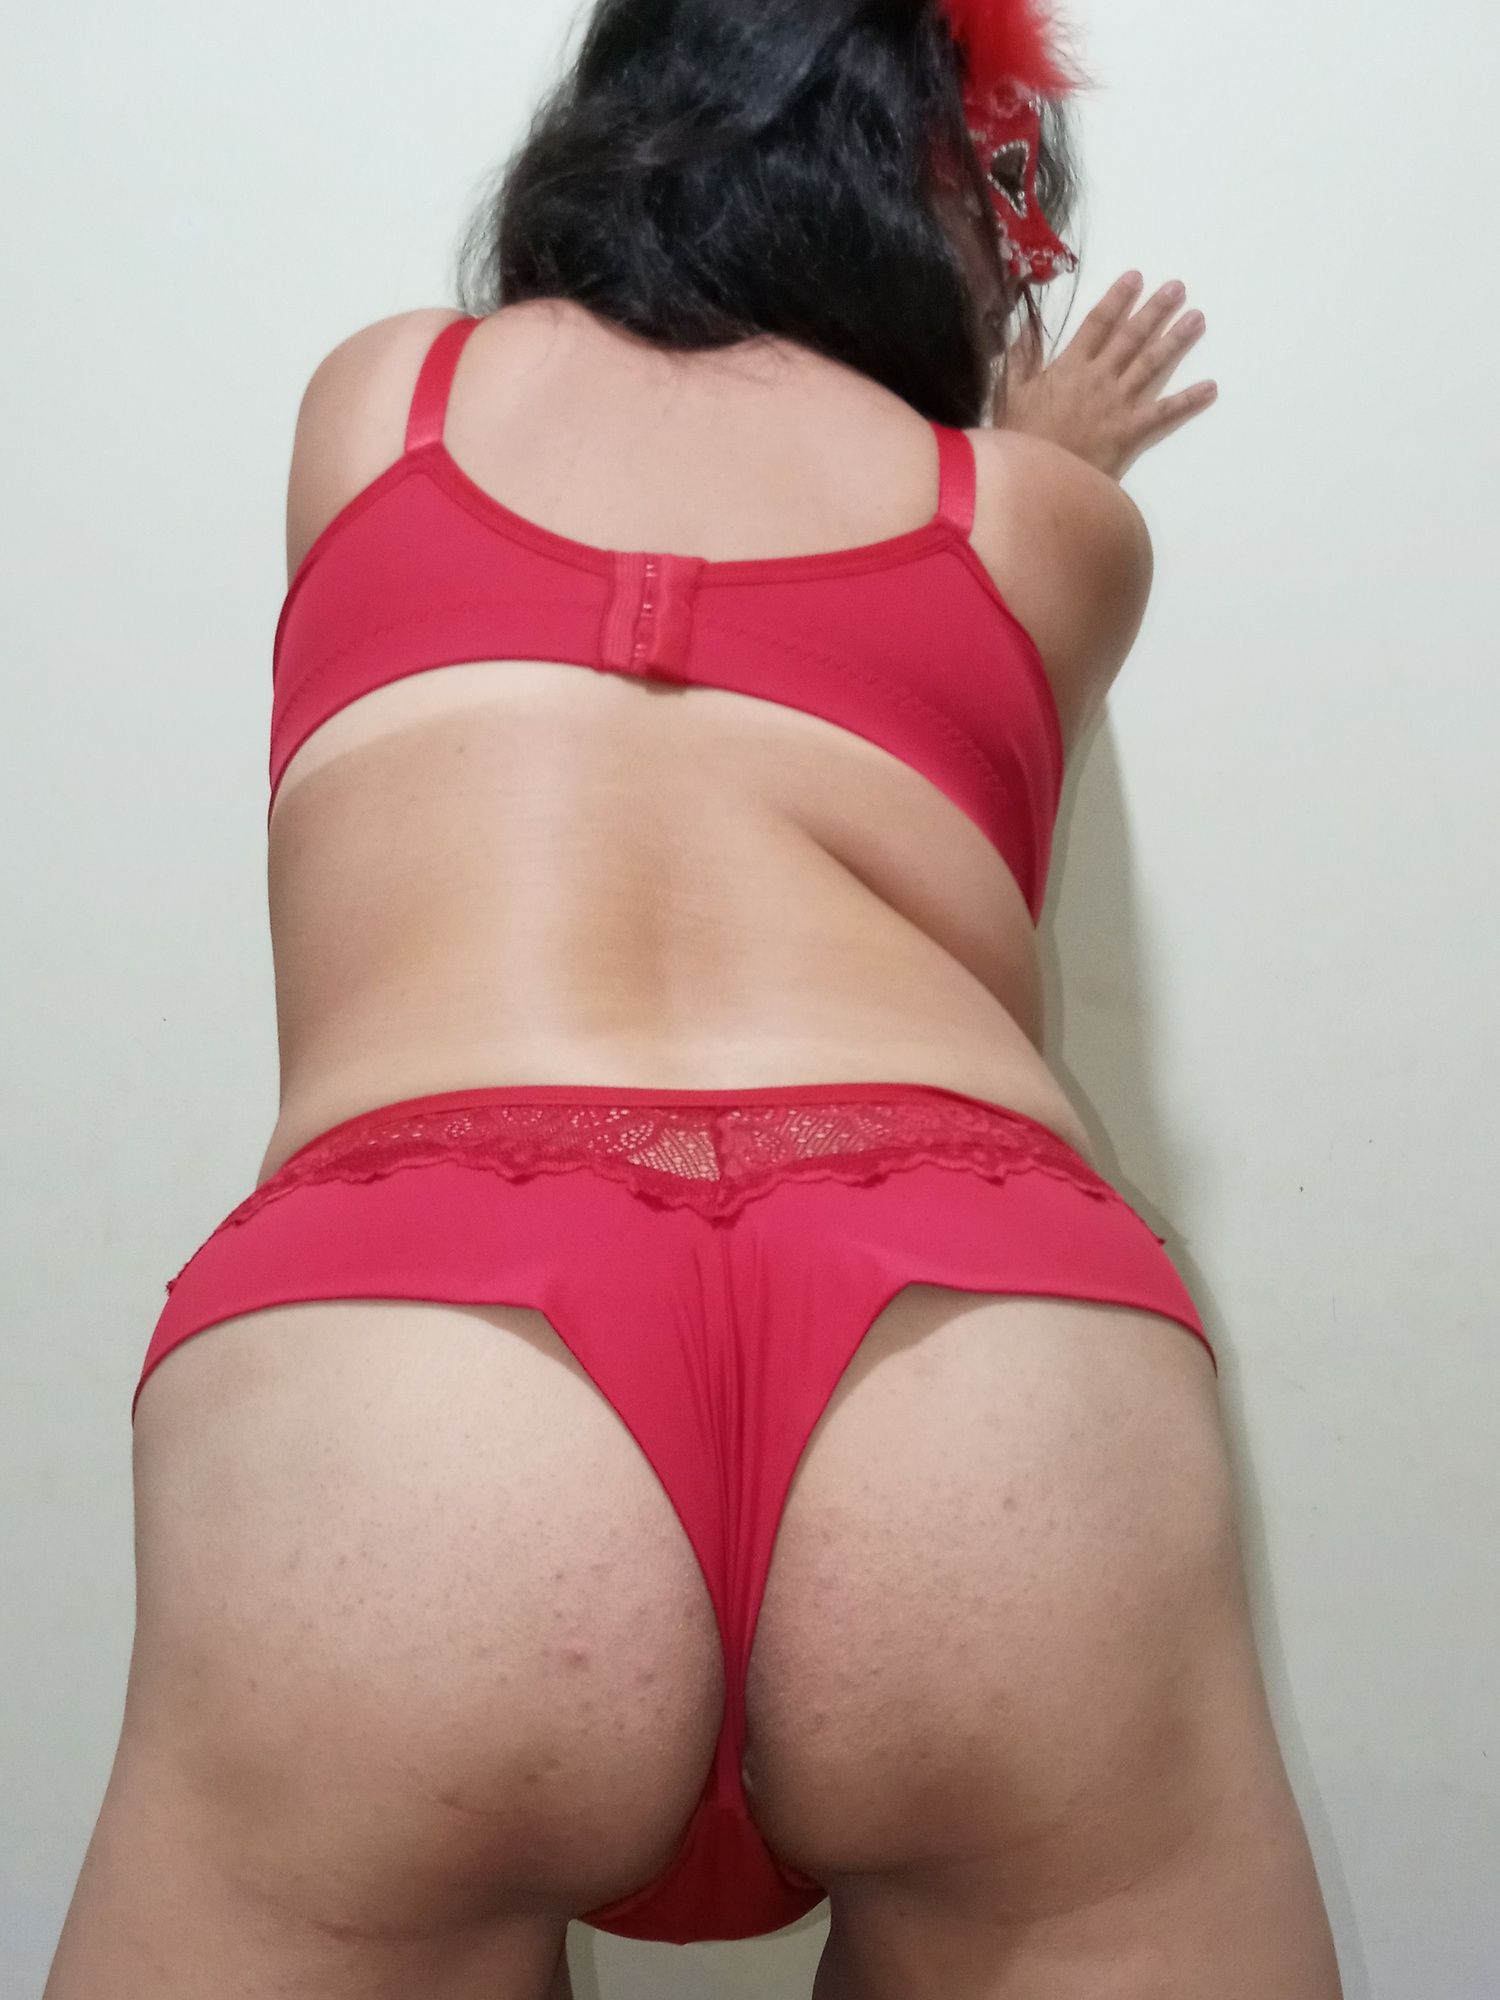 SHOWING OFF WEARING RED LINGERIE...